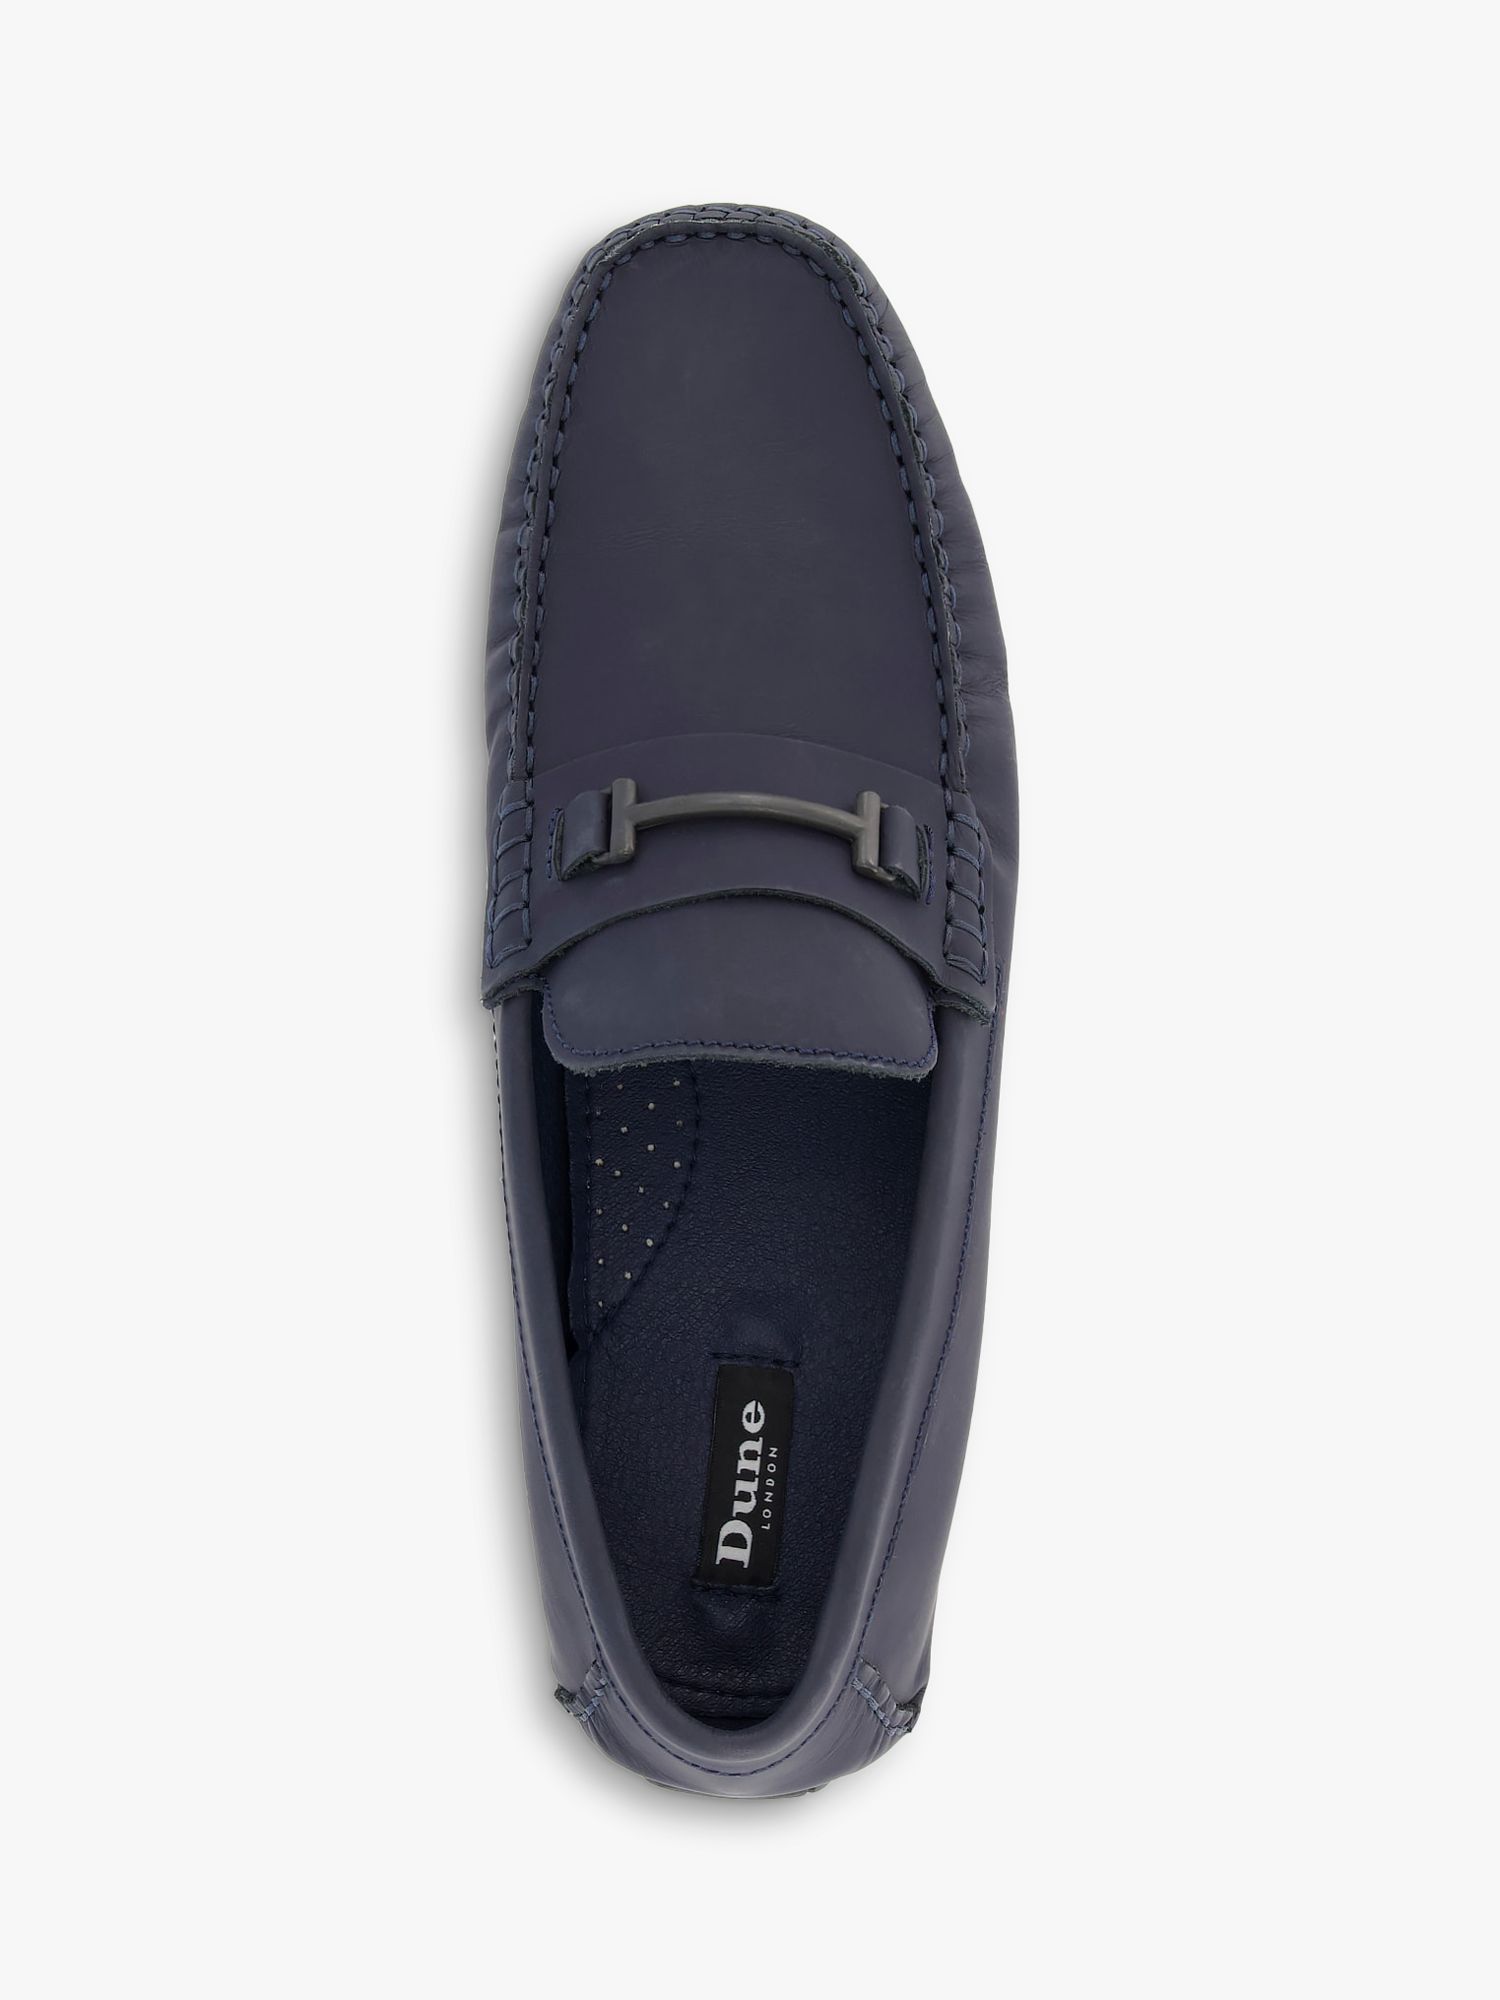 Dune Boland Leather Driving Shoes, Navy at John Lewis & Partners